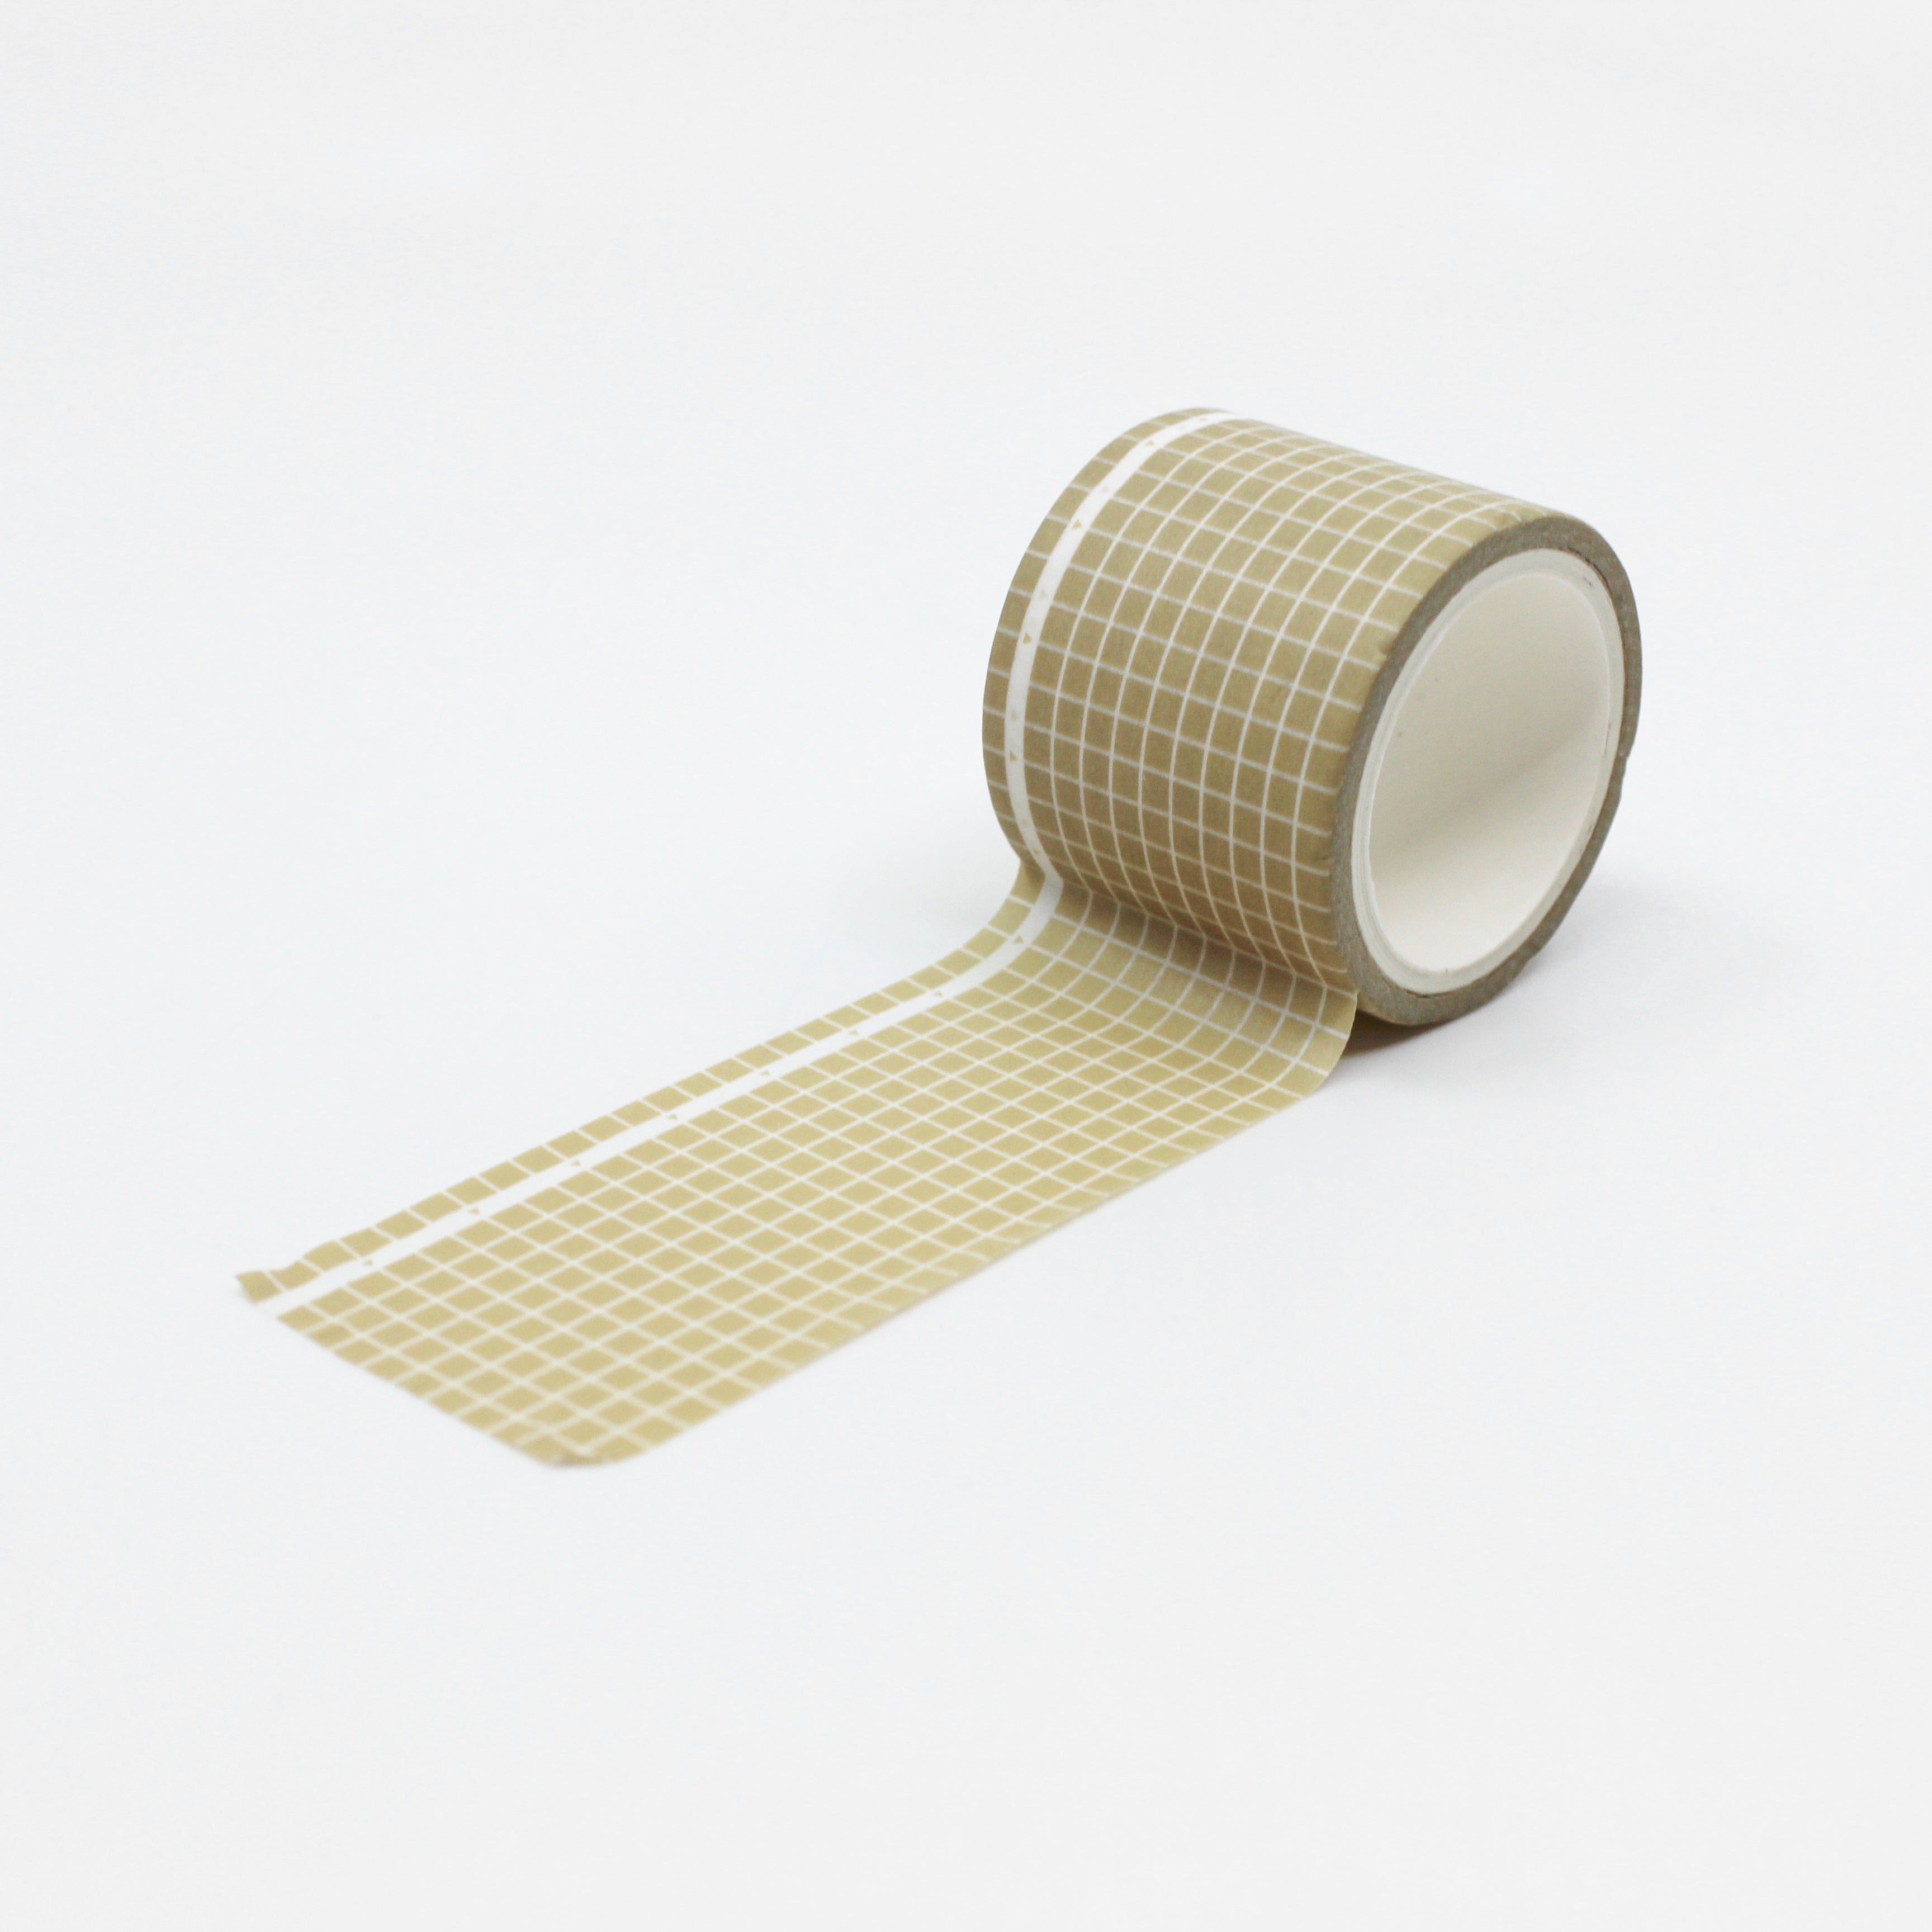 This is a full pattern repeat view of warm tan khaki wide grid washi tape BBB Supplies Craft Shop